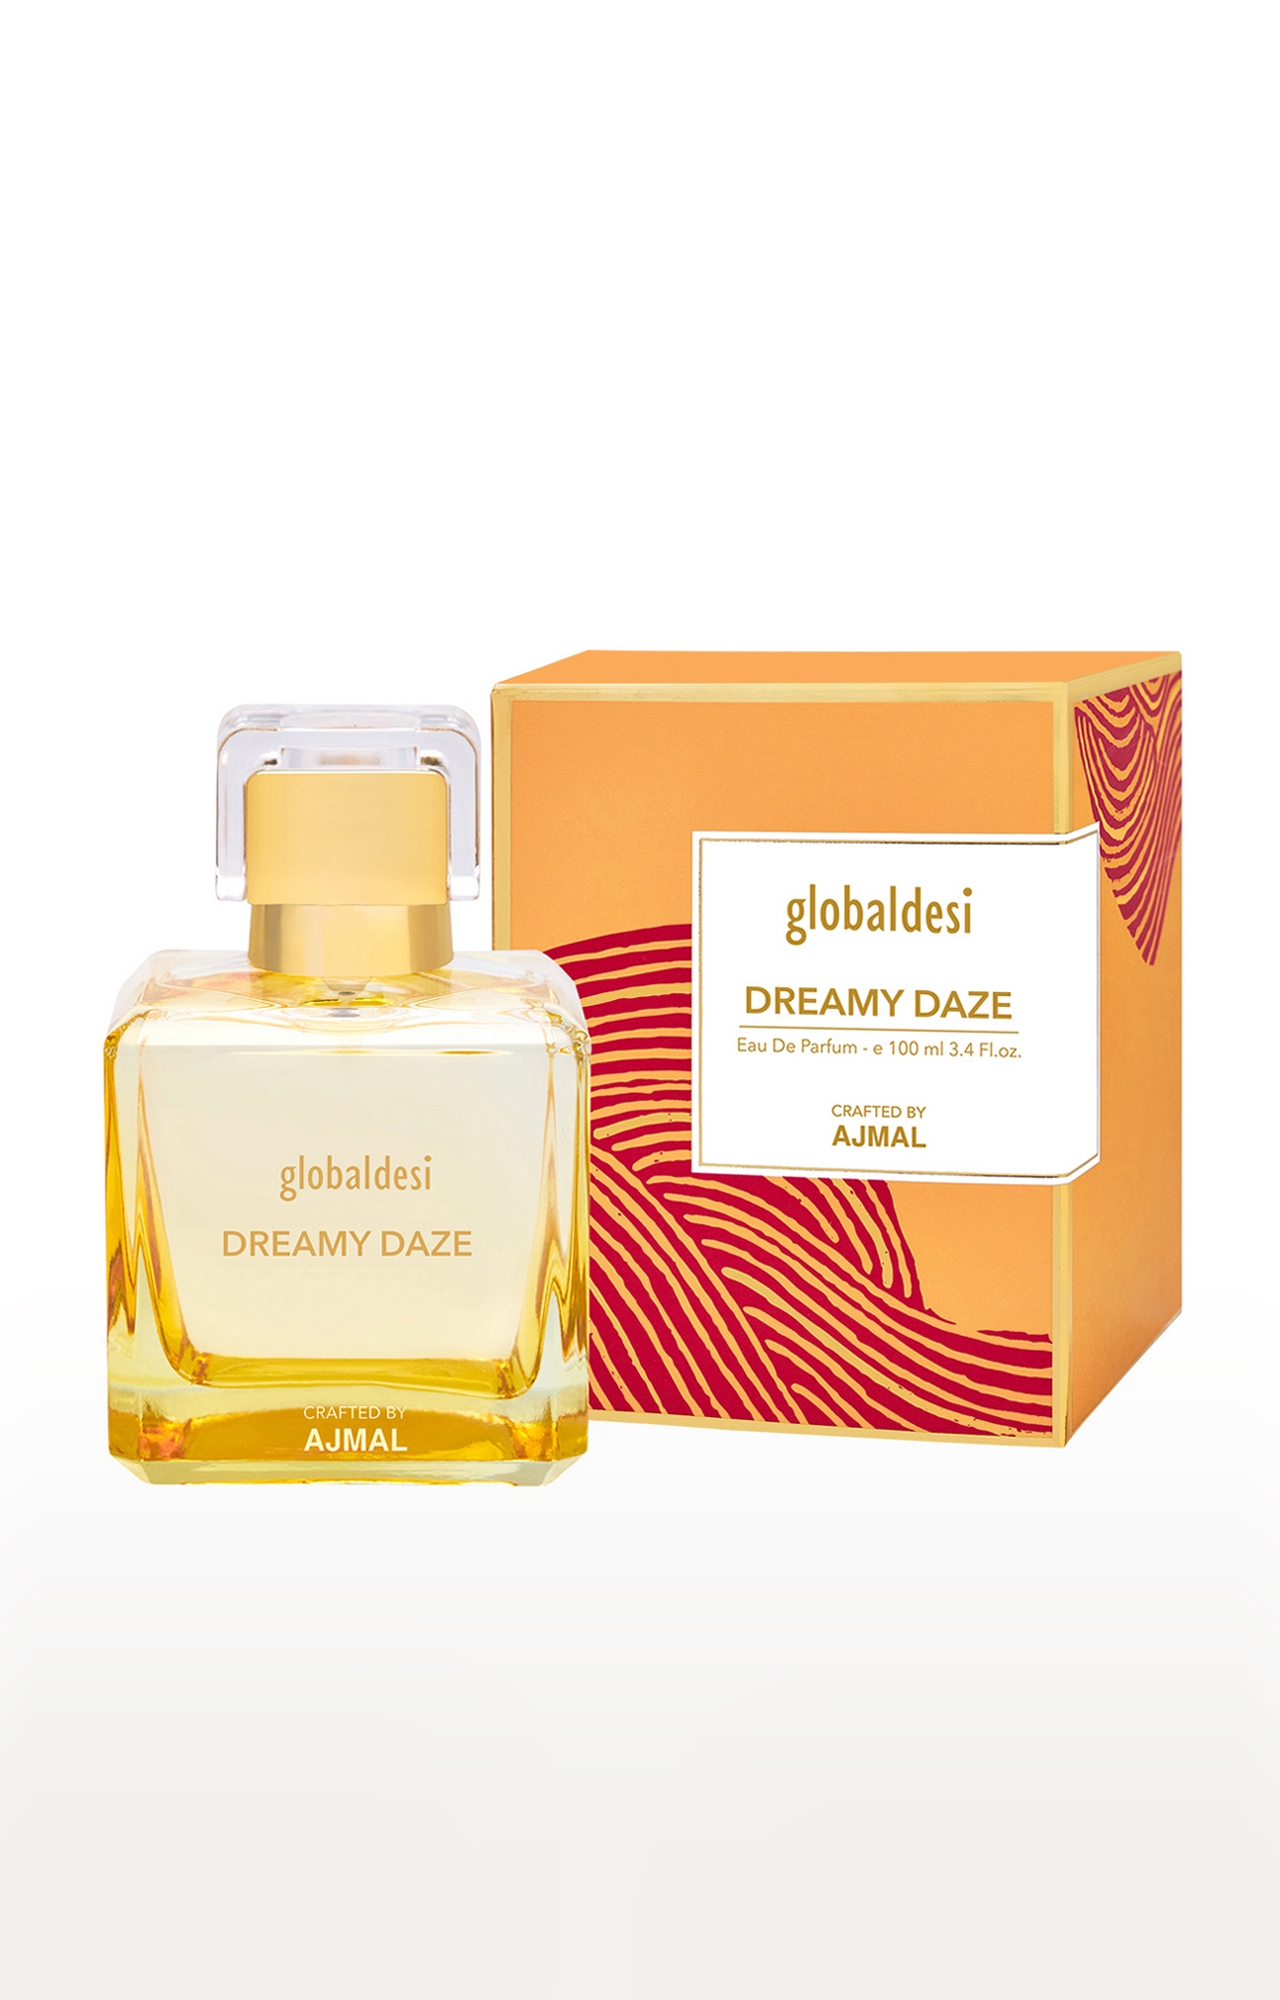 Global Desi Crafted By Ajmal | Global Desi Dreamy Daze Eau De Parfum 100ML Long Lasting Scent Spray Gift For Women Crafted By Ajmal